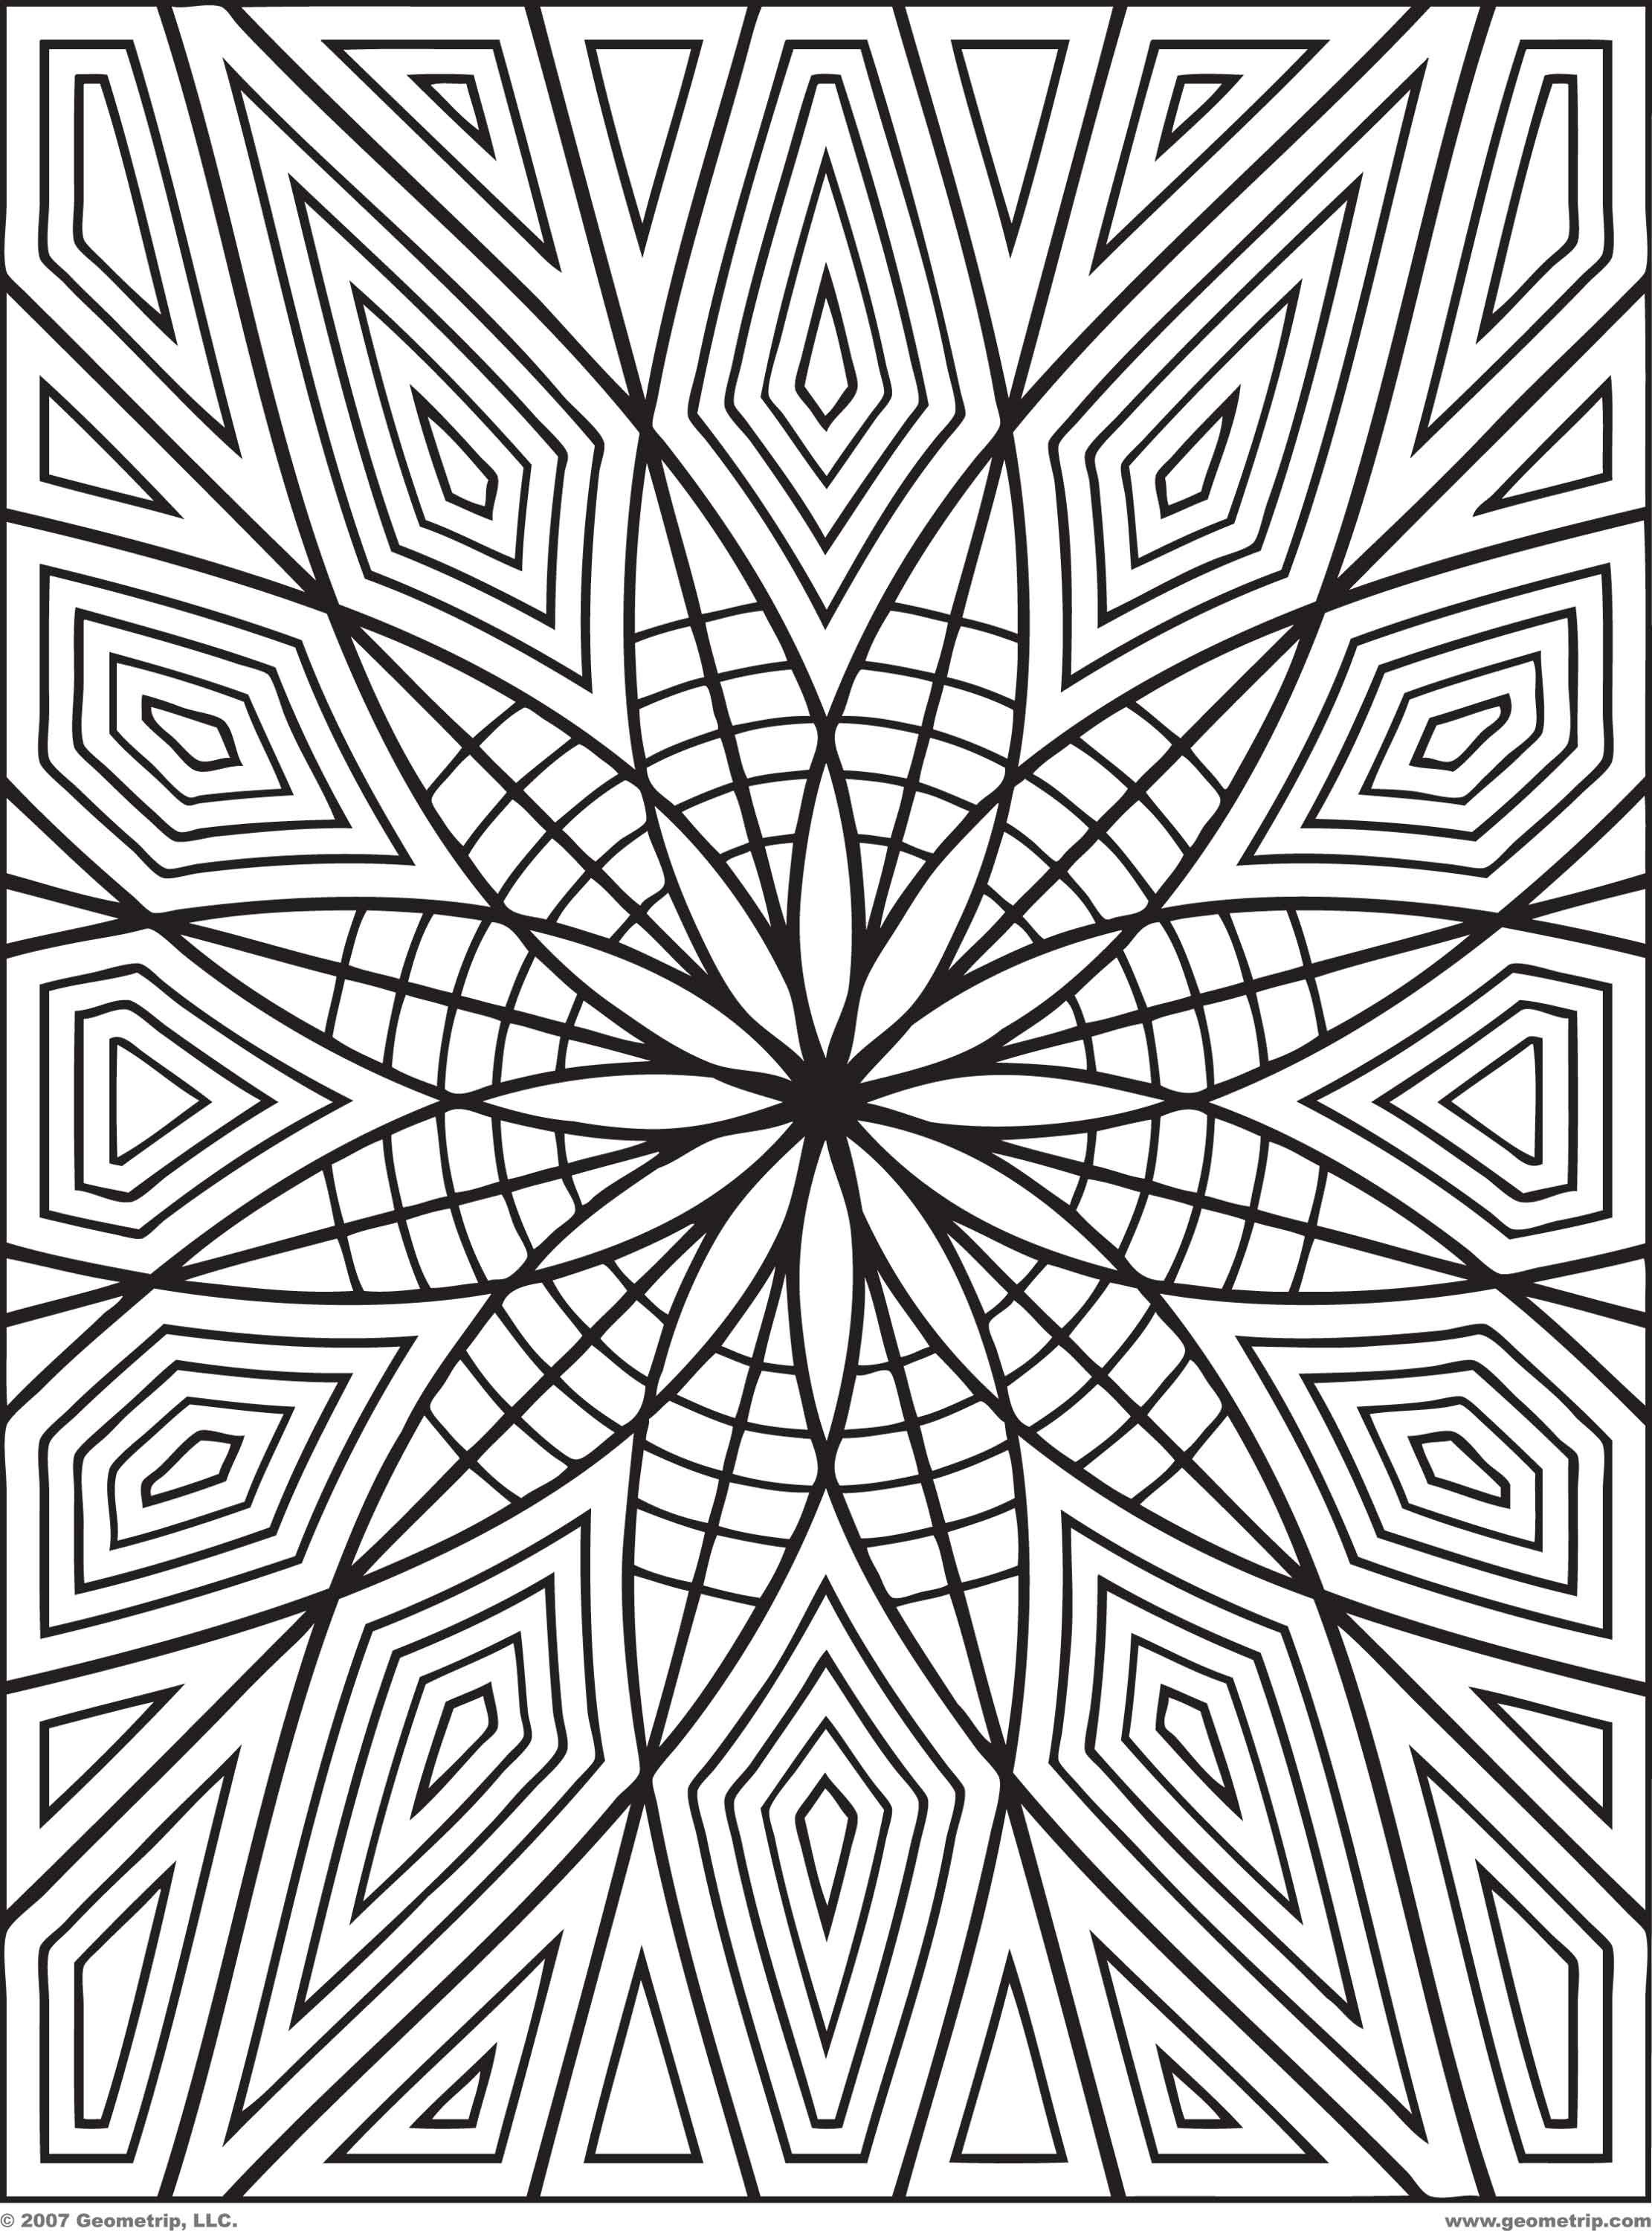 Coloring Pages. trippy coloring pages ~ Worldpaint